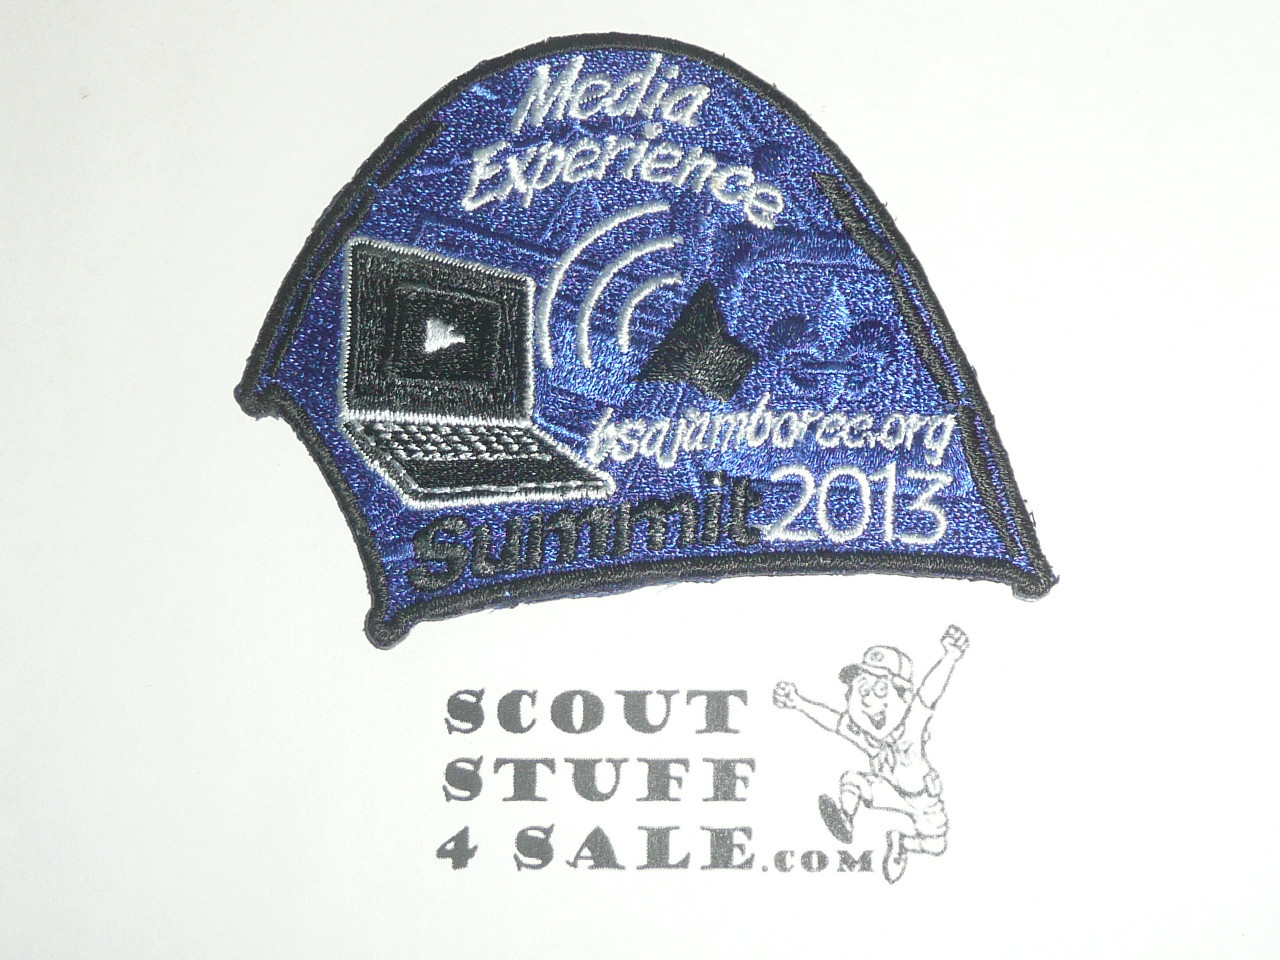 2013 National Jamboree Media Experience Patch